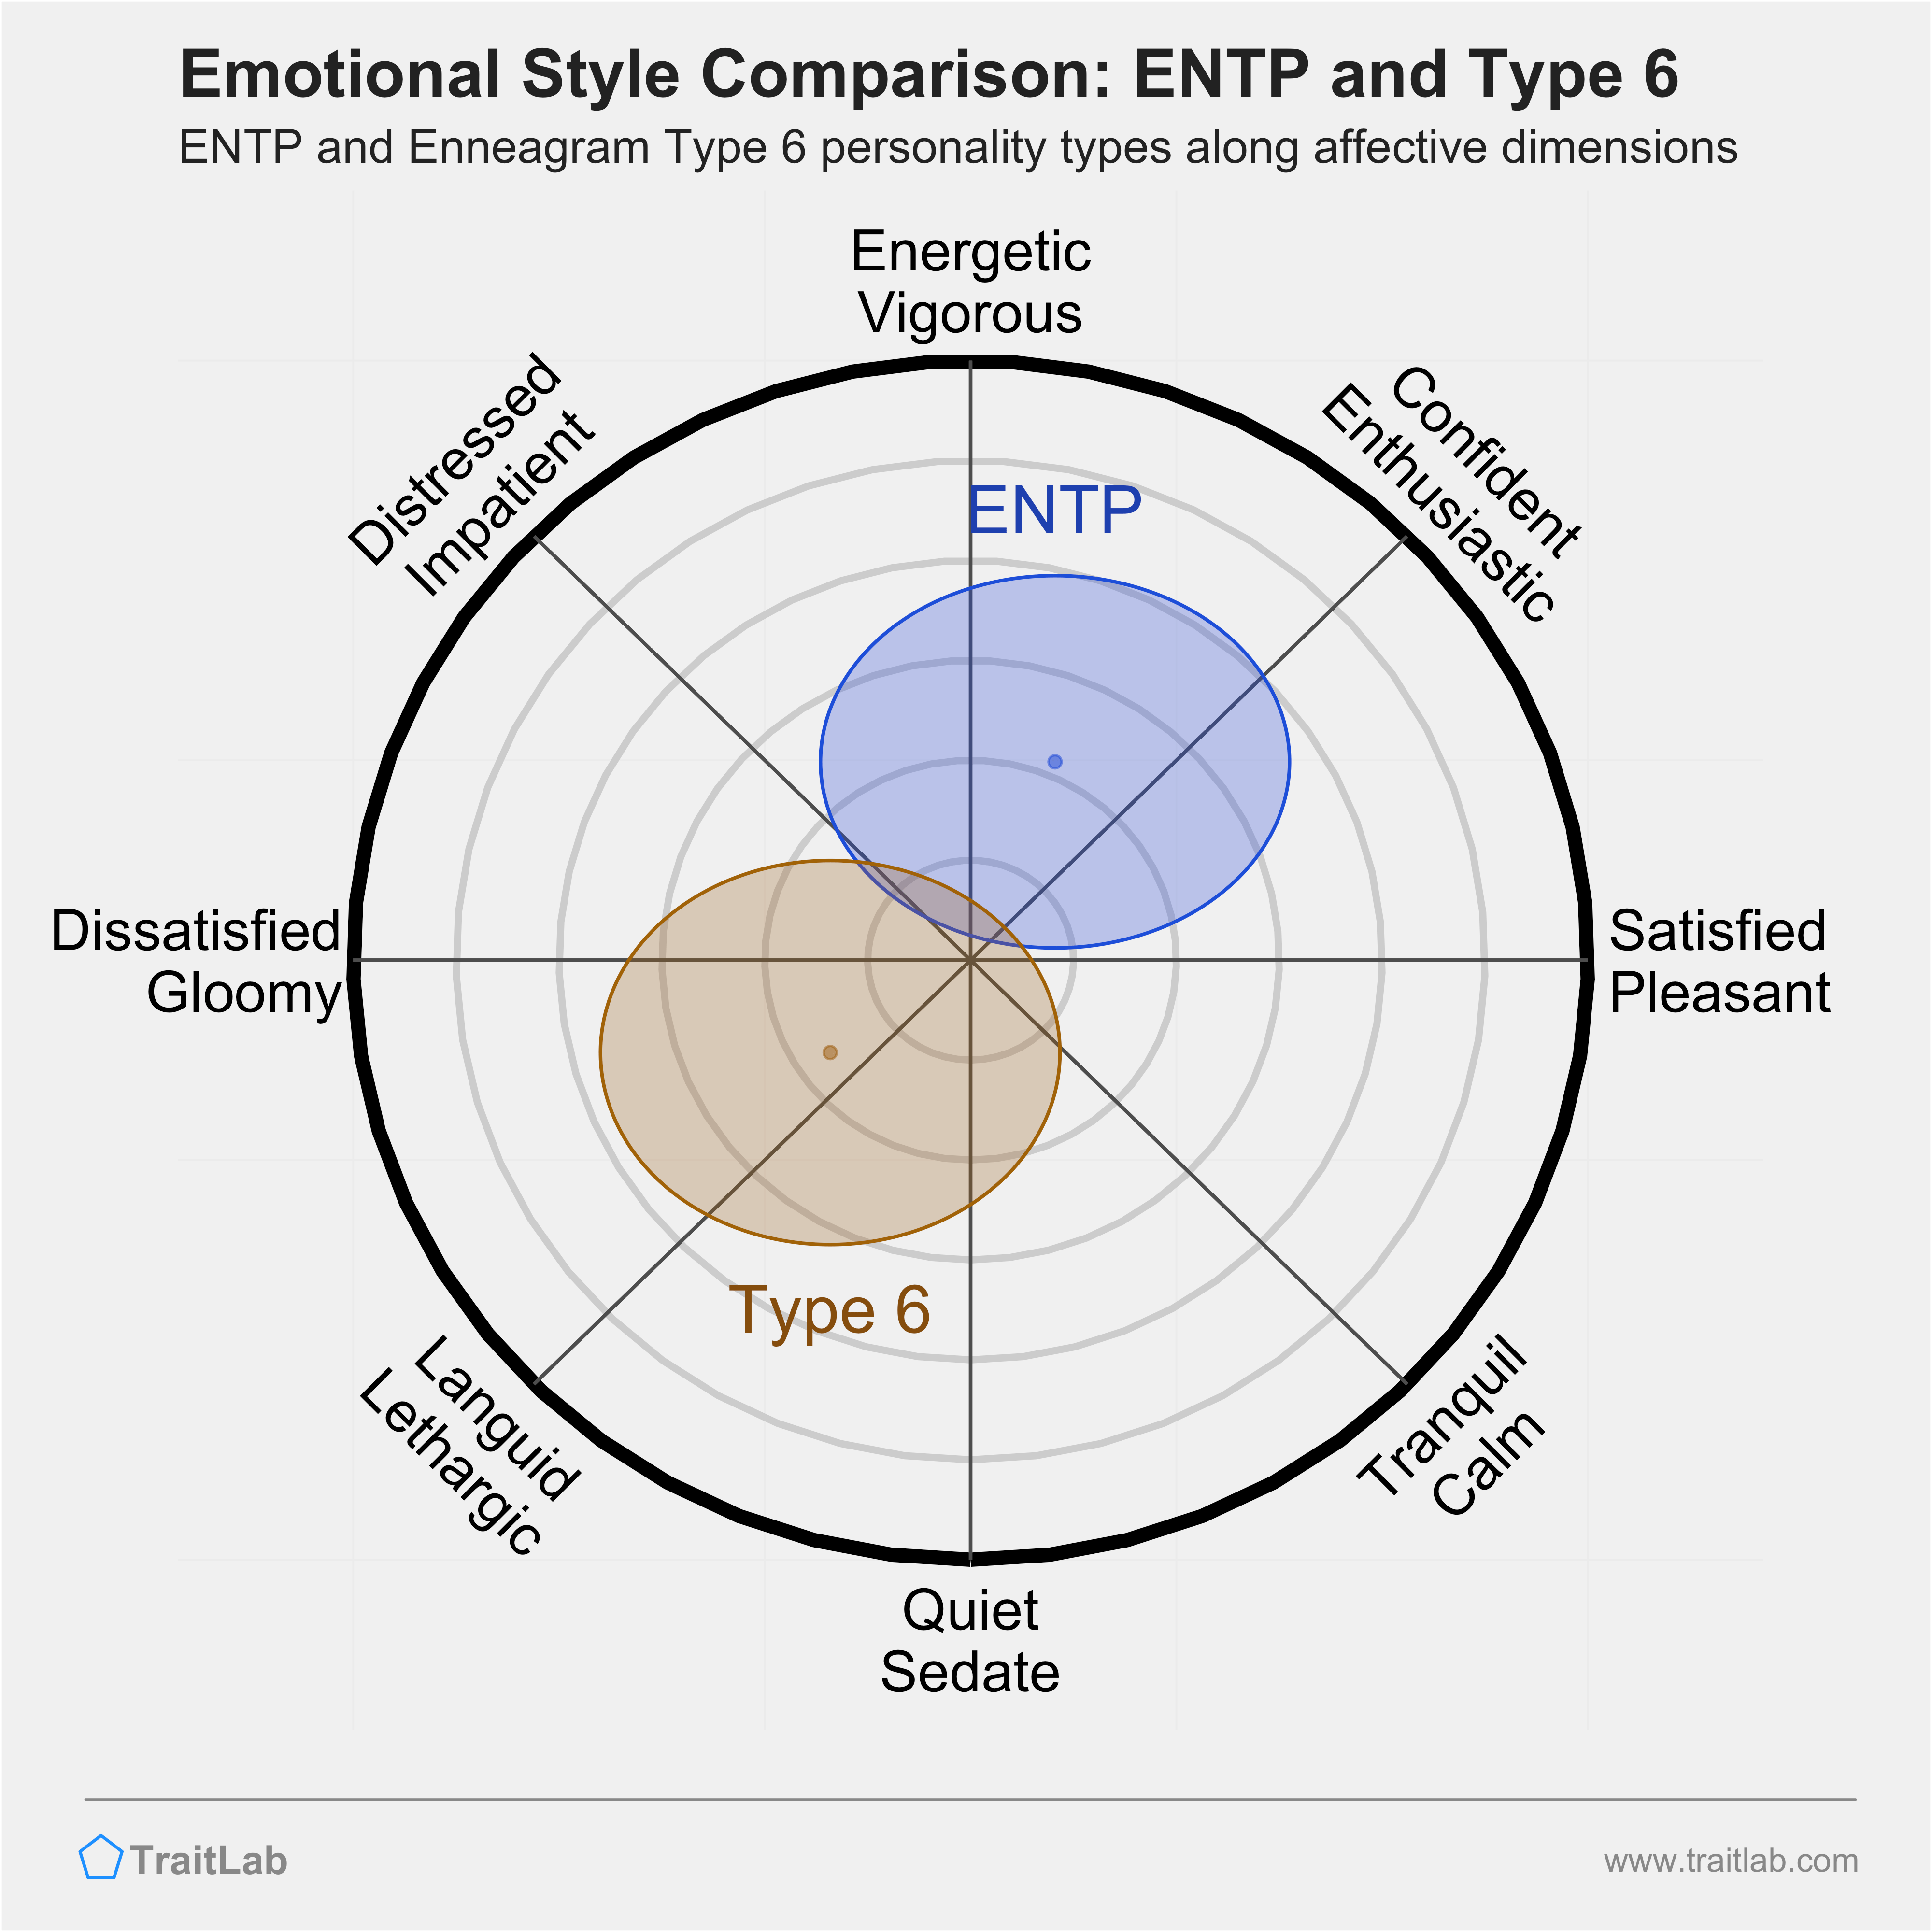 ENTP and Type 6 comparison across emotional (affective) dimensions